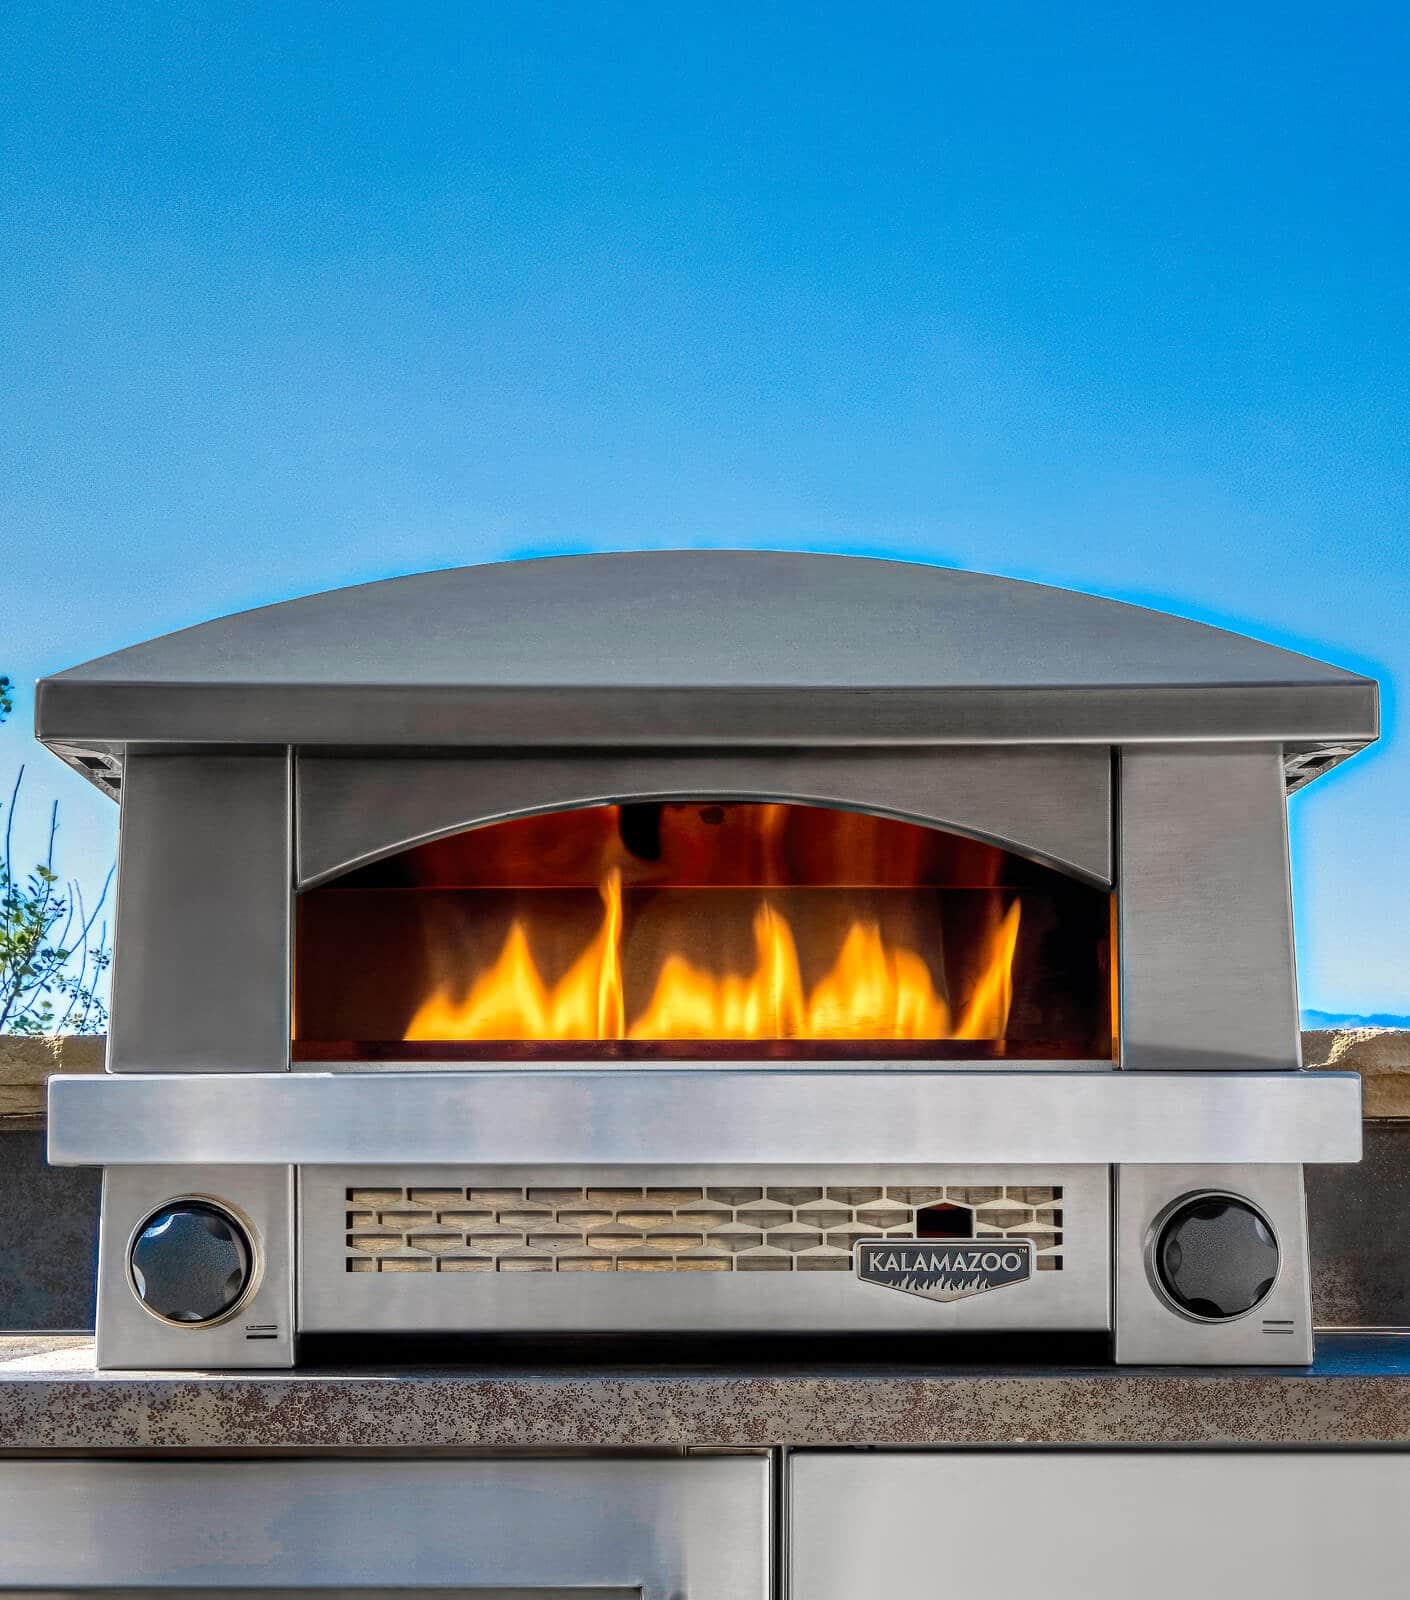 NEW Fully Assembled Stainless Steel Artisan Outdoor Wood Fired